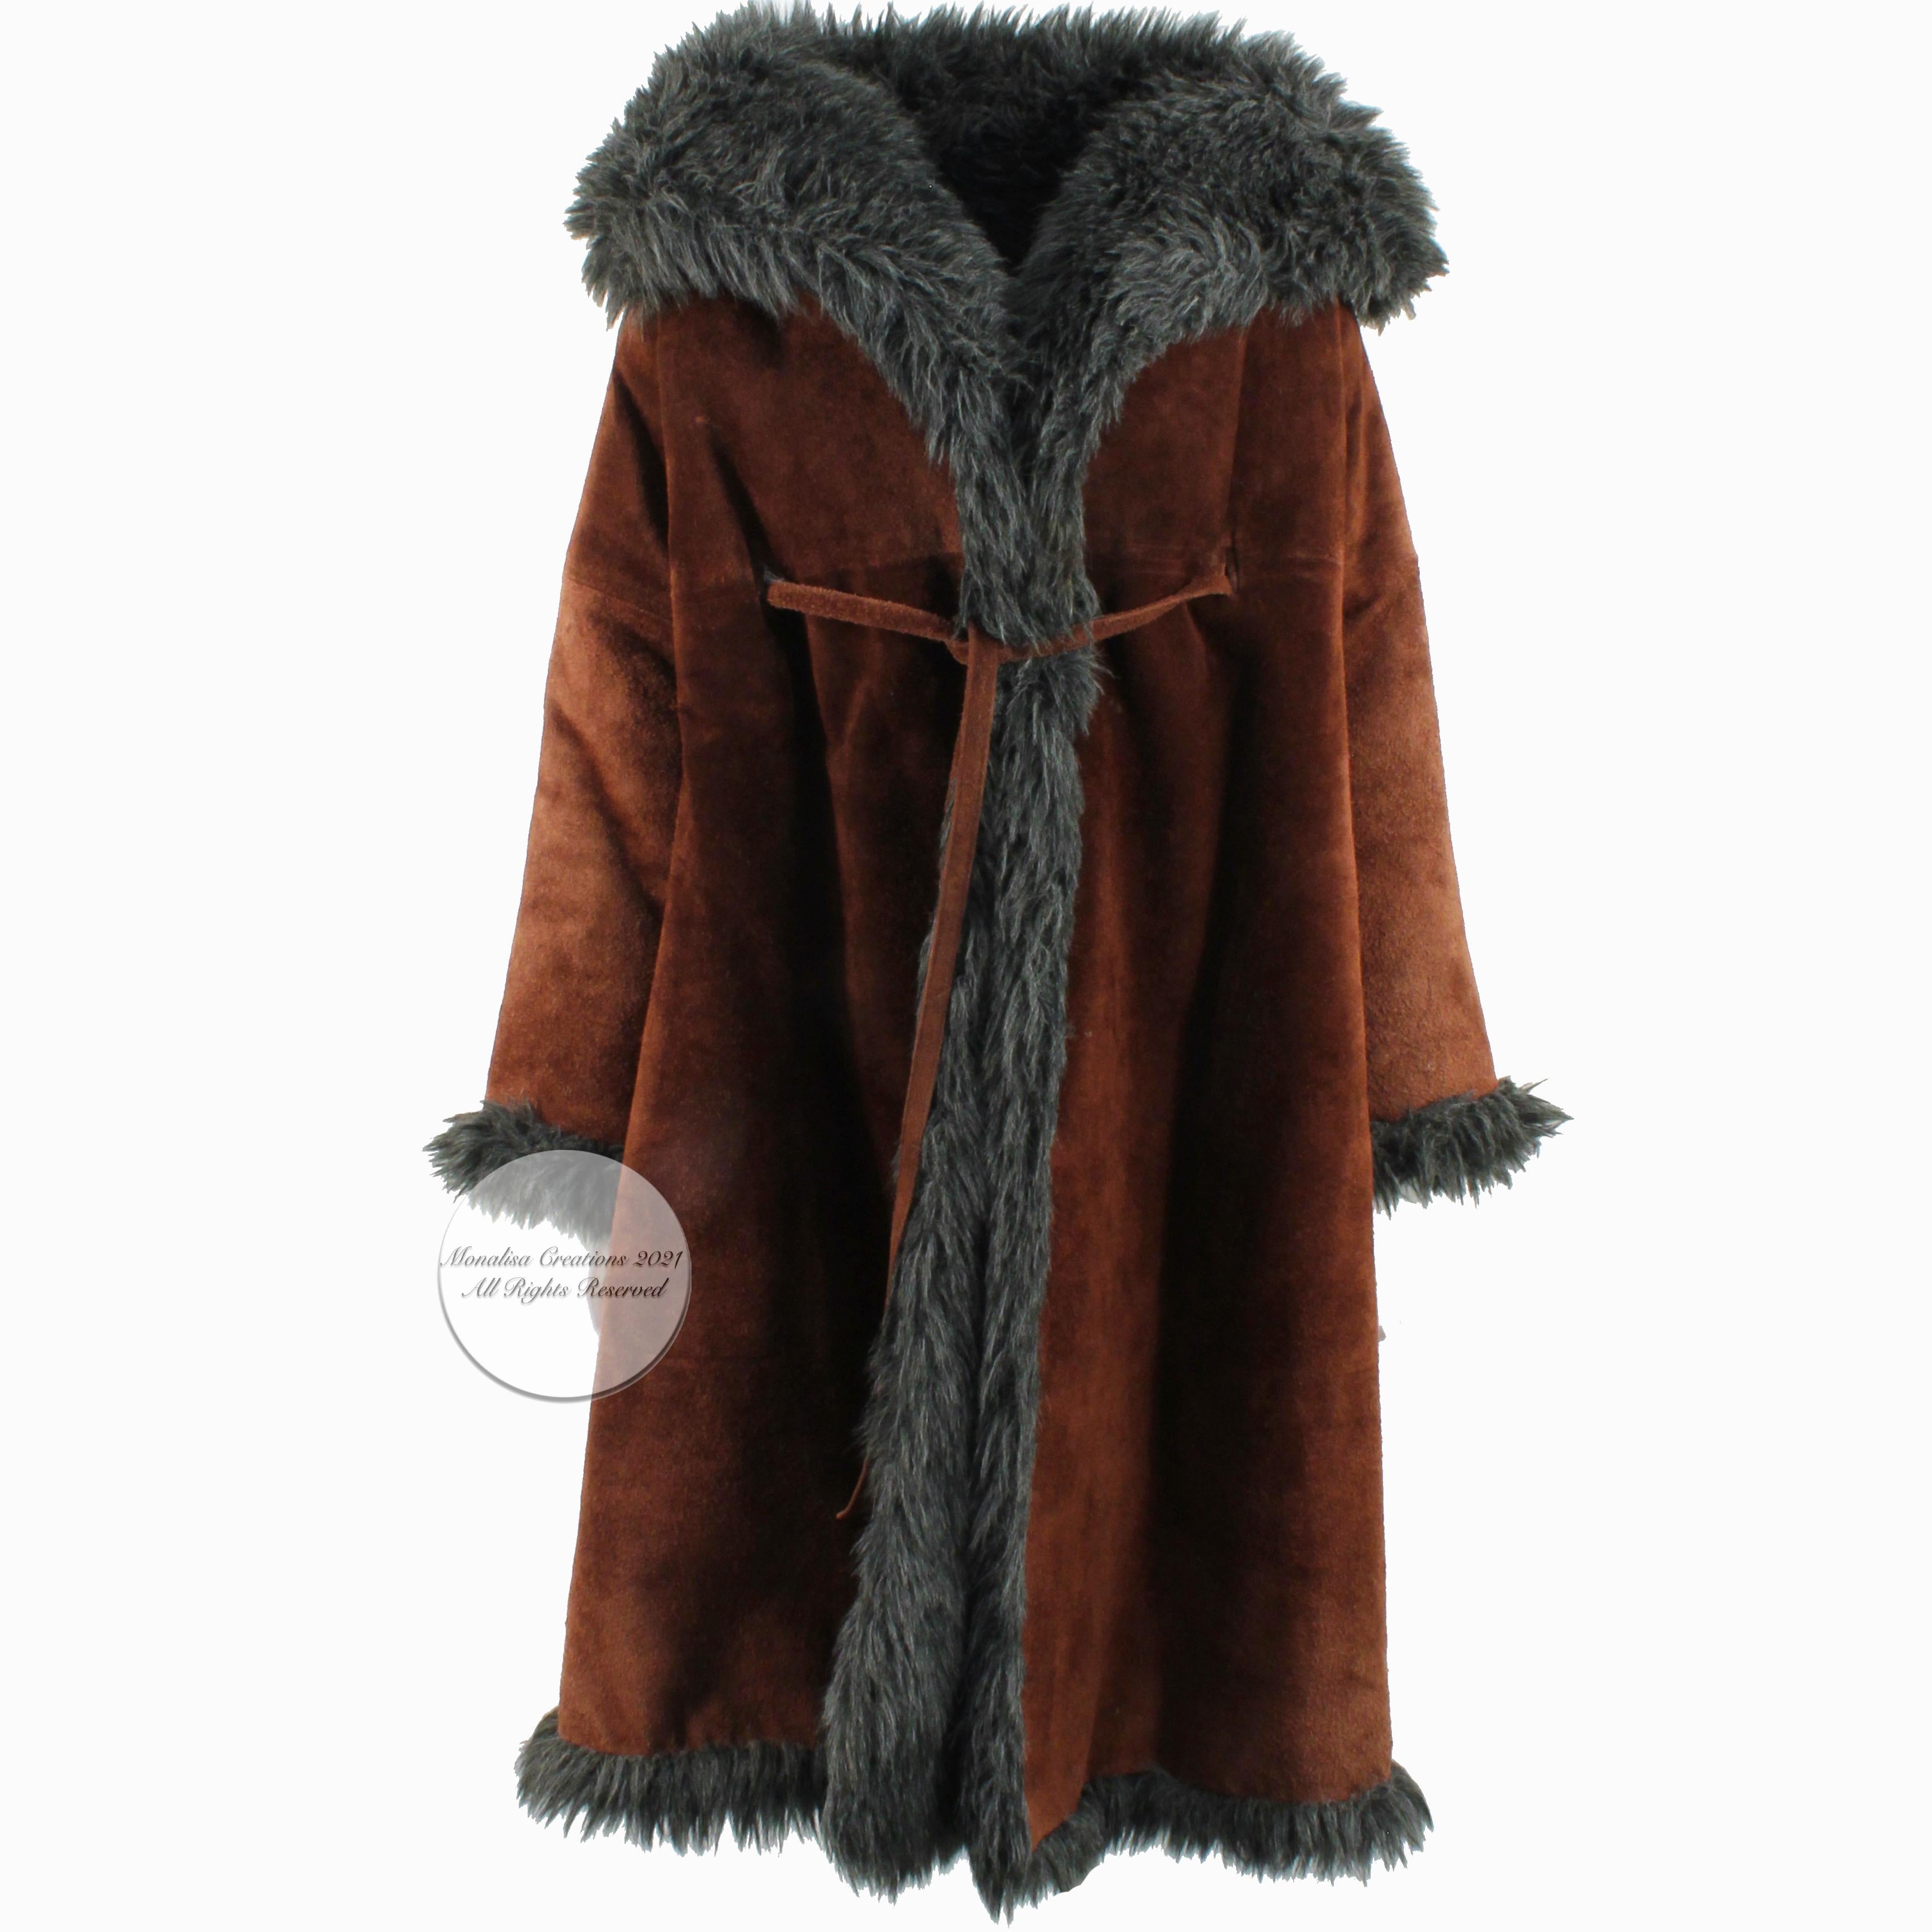 Fabulous Bonnie Cashin for Sills Noh Coat, likely made in the 60s. Made from mahogany brown suede, it's lined in shaggy gray faux fur and ties with a suede tie wrap. Half moon pockets on each hip and an oversized shawl collar to keep you toasty